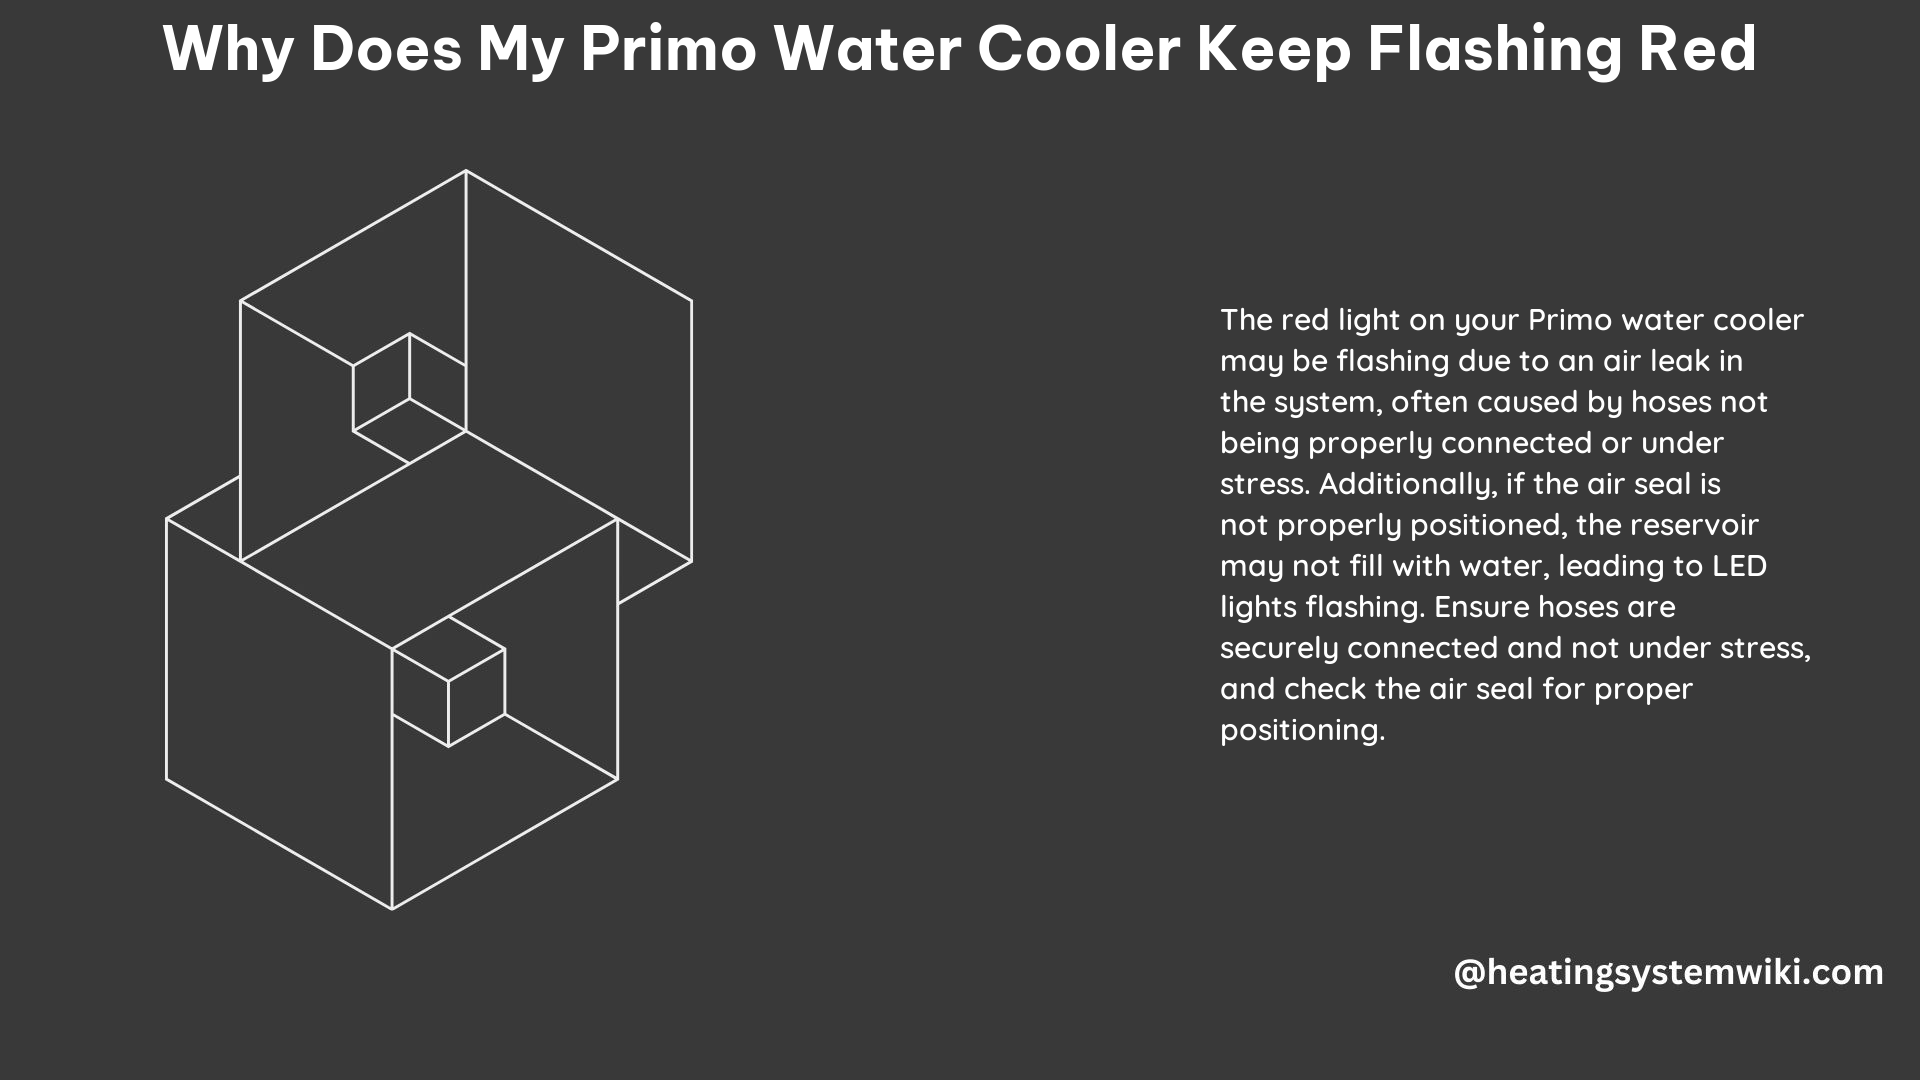 Why Does My Primo Water Cooler Keep Flashing Red